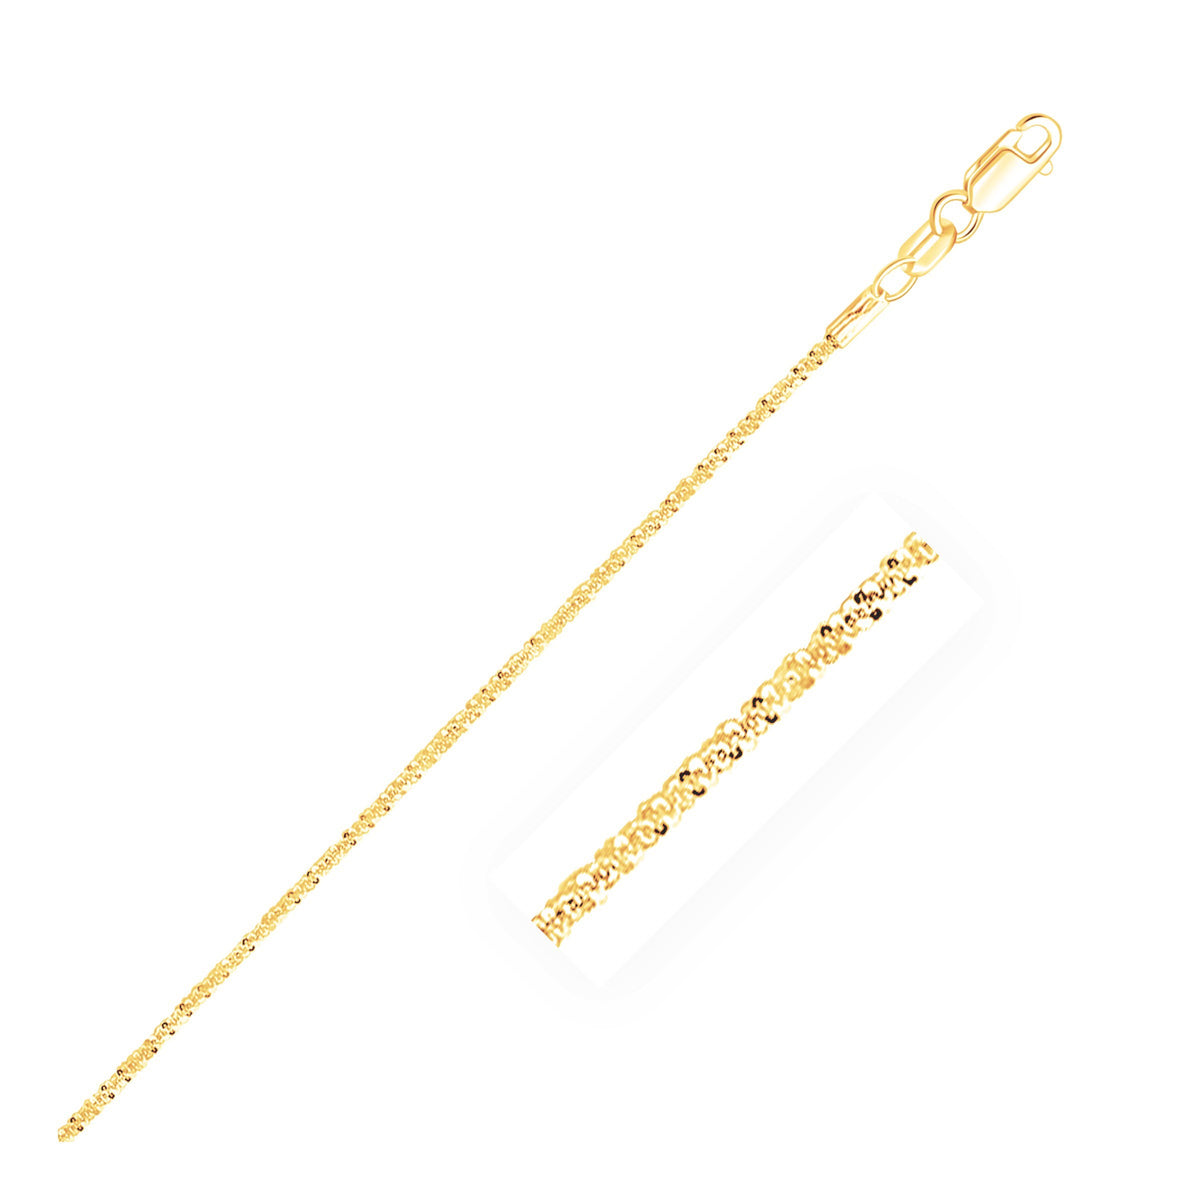 Sparkle Anklet - 10k Yellow Gold 1.5mm